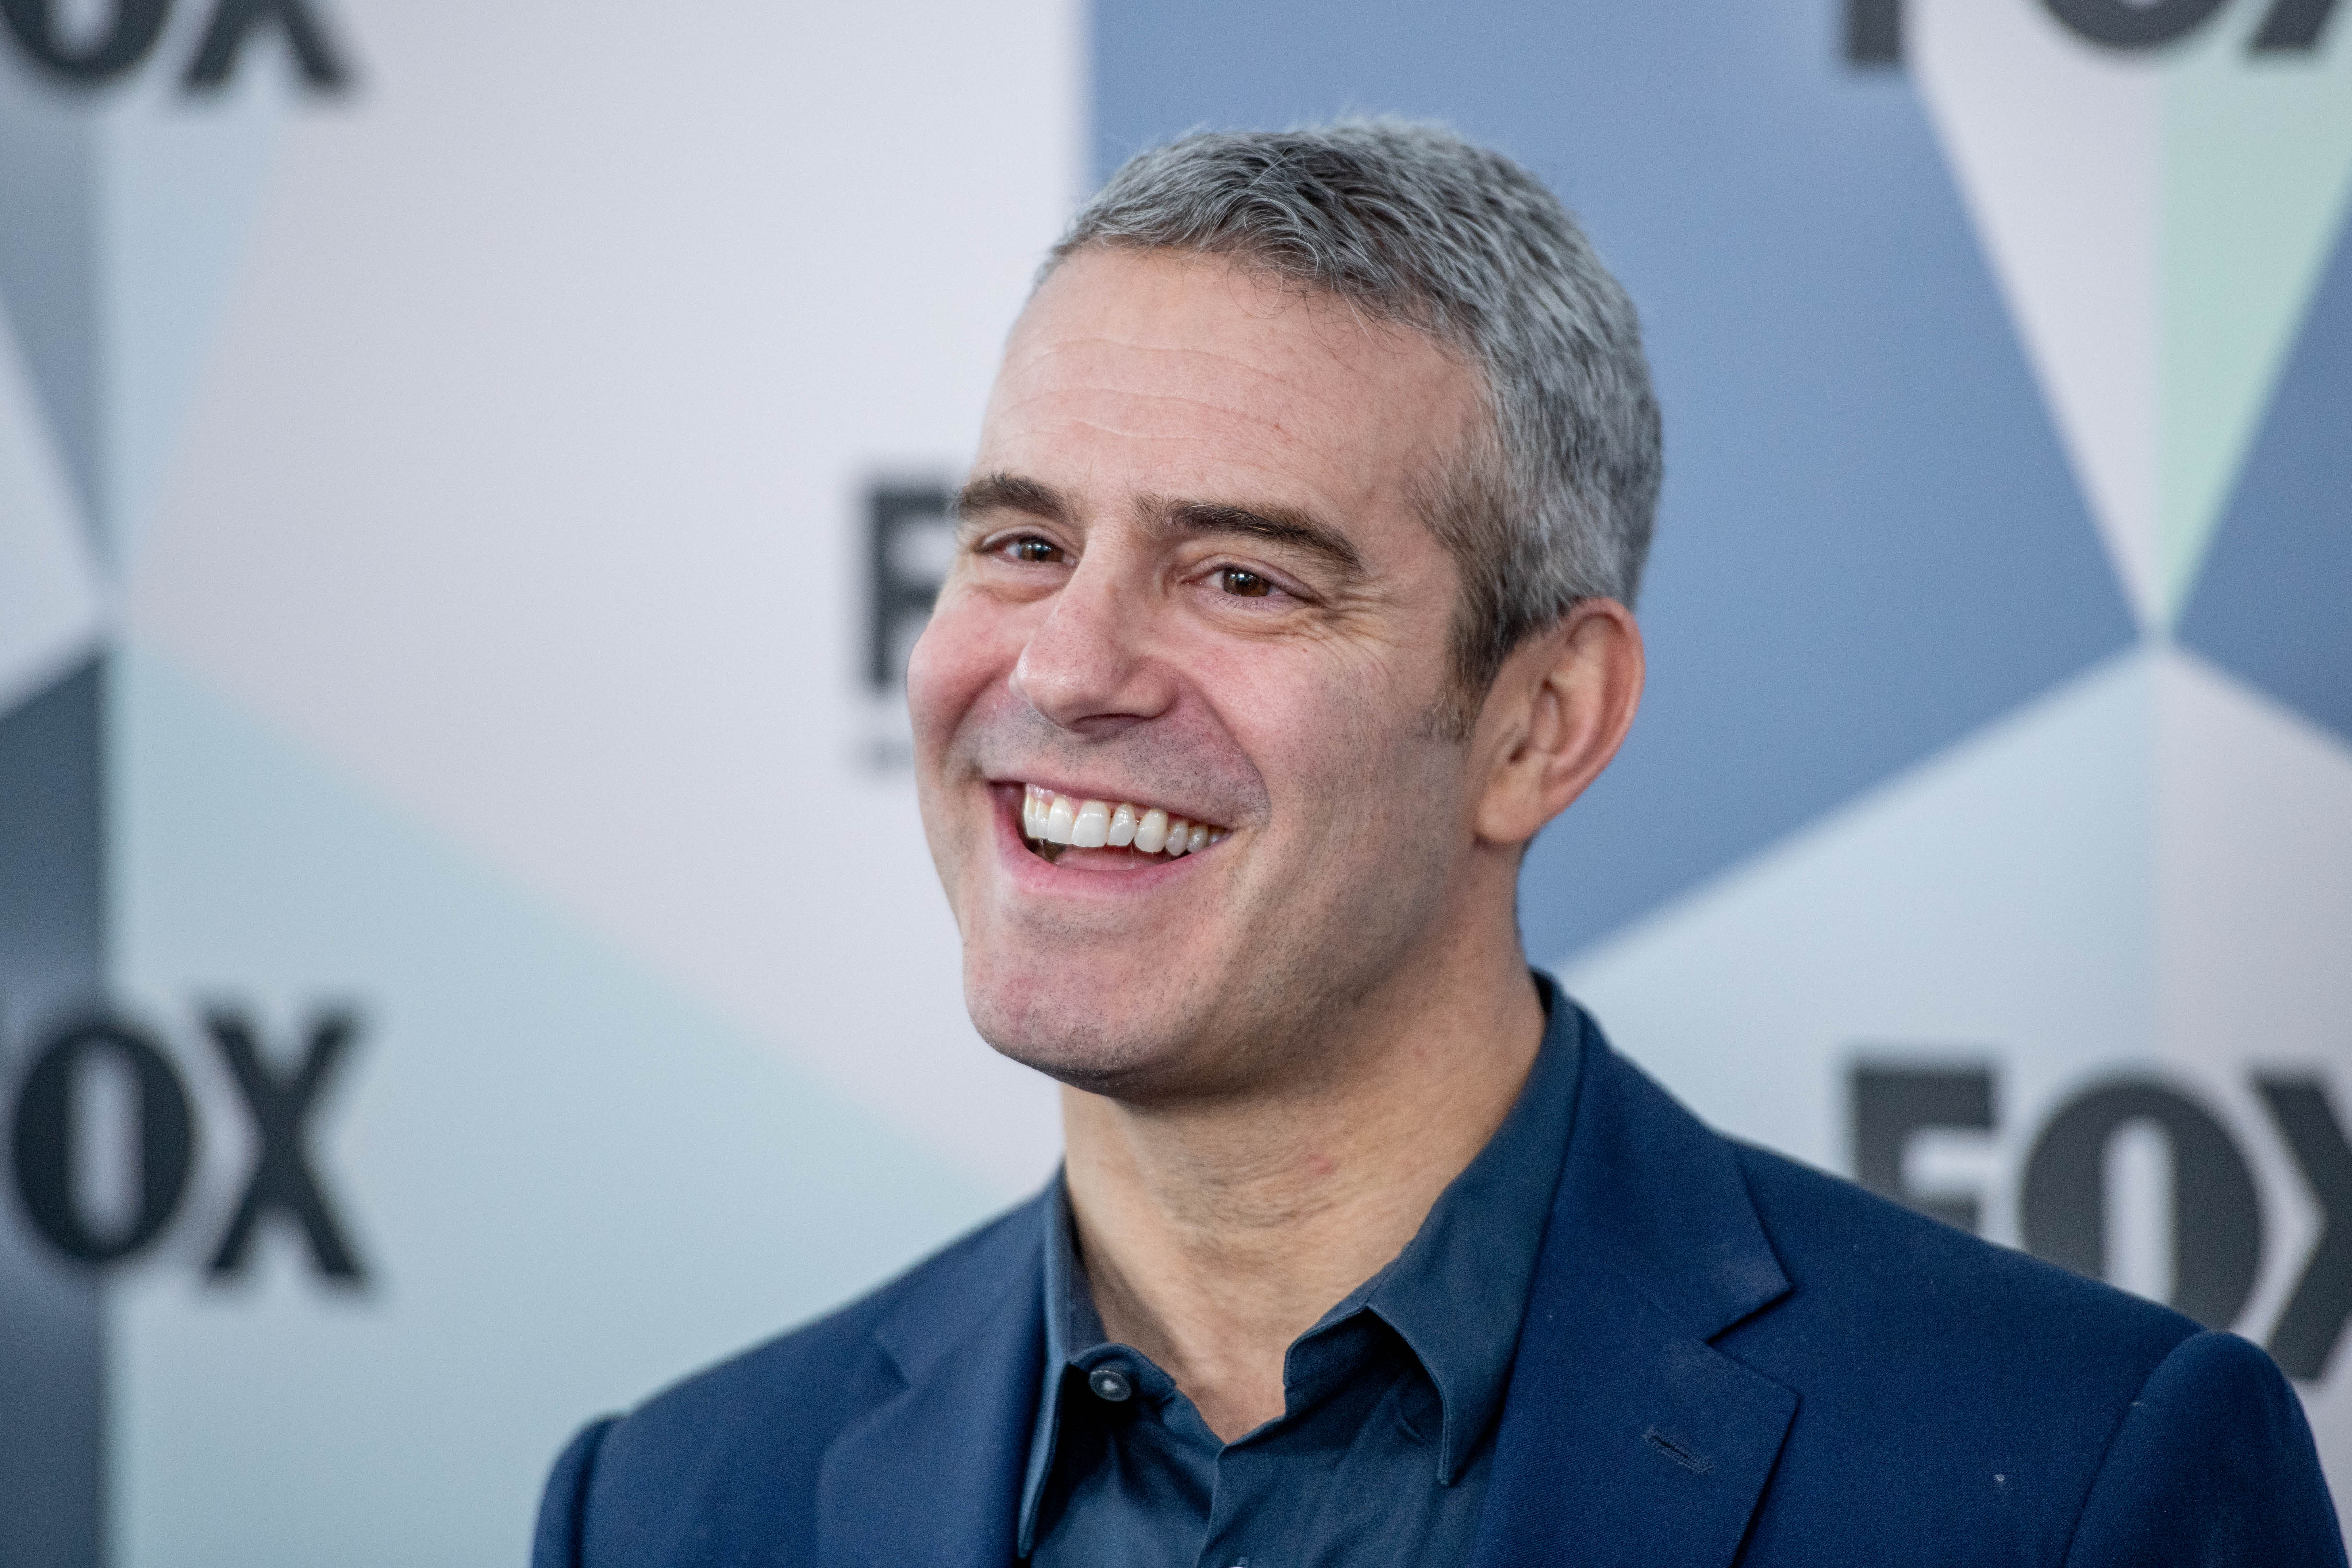 Andy Cohen shares conversation that took place with Instagram troll